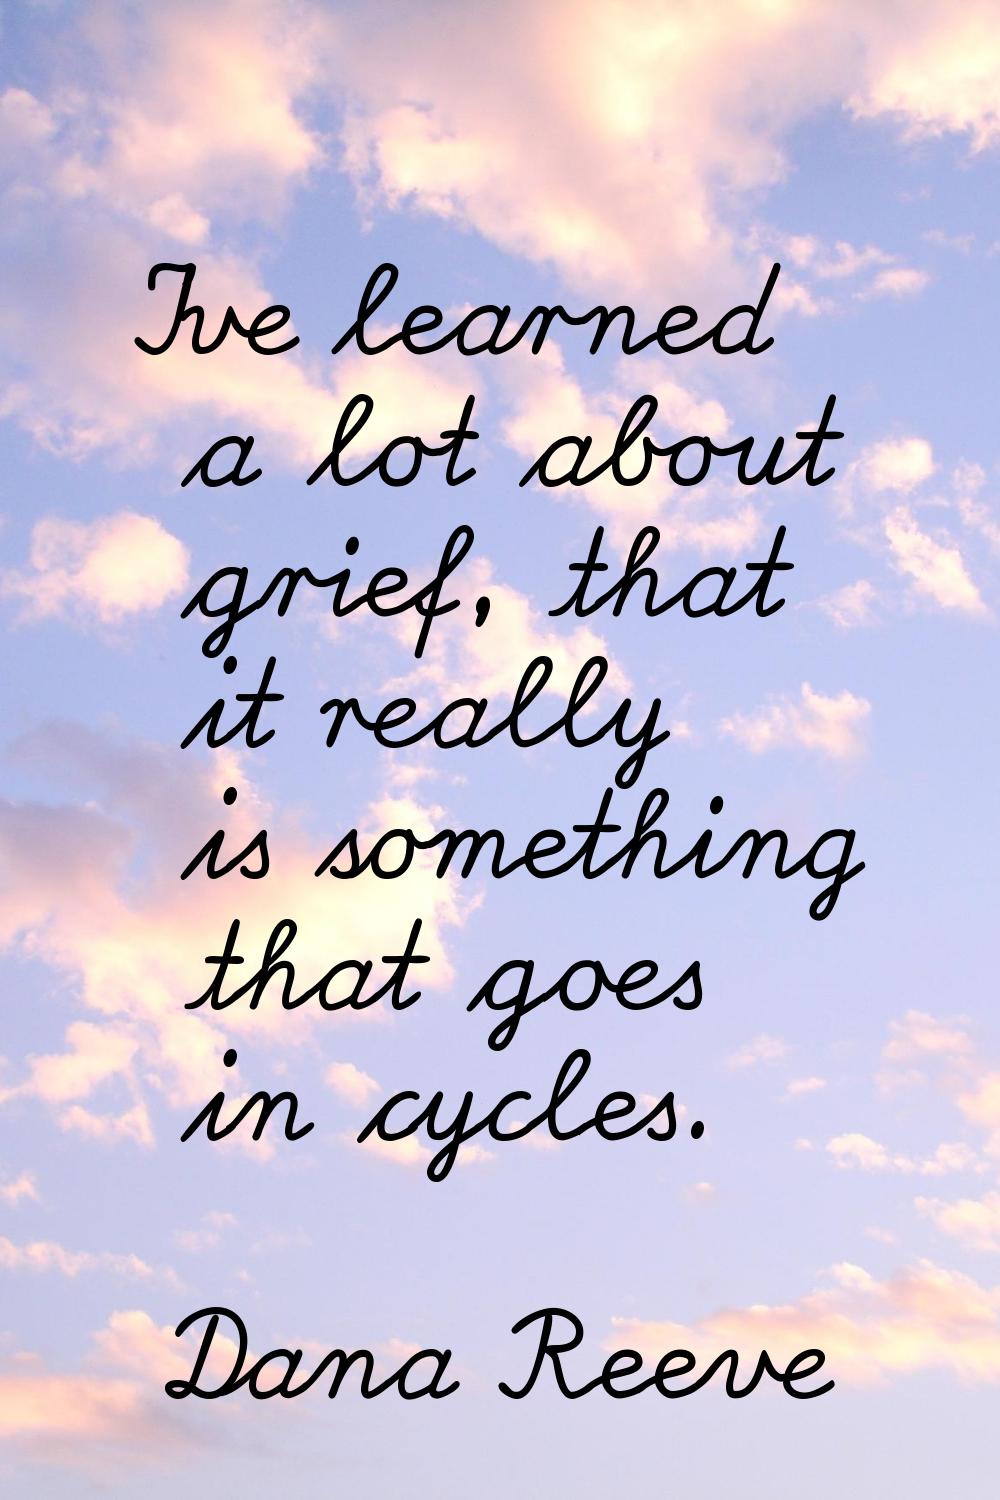 I've learned a lot about grief, that it really is something that goes in cycles.